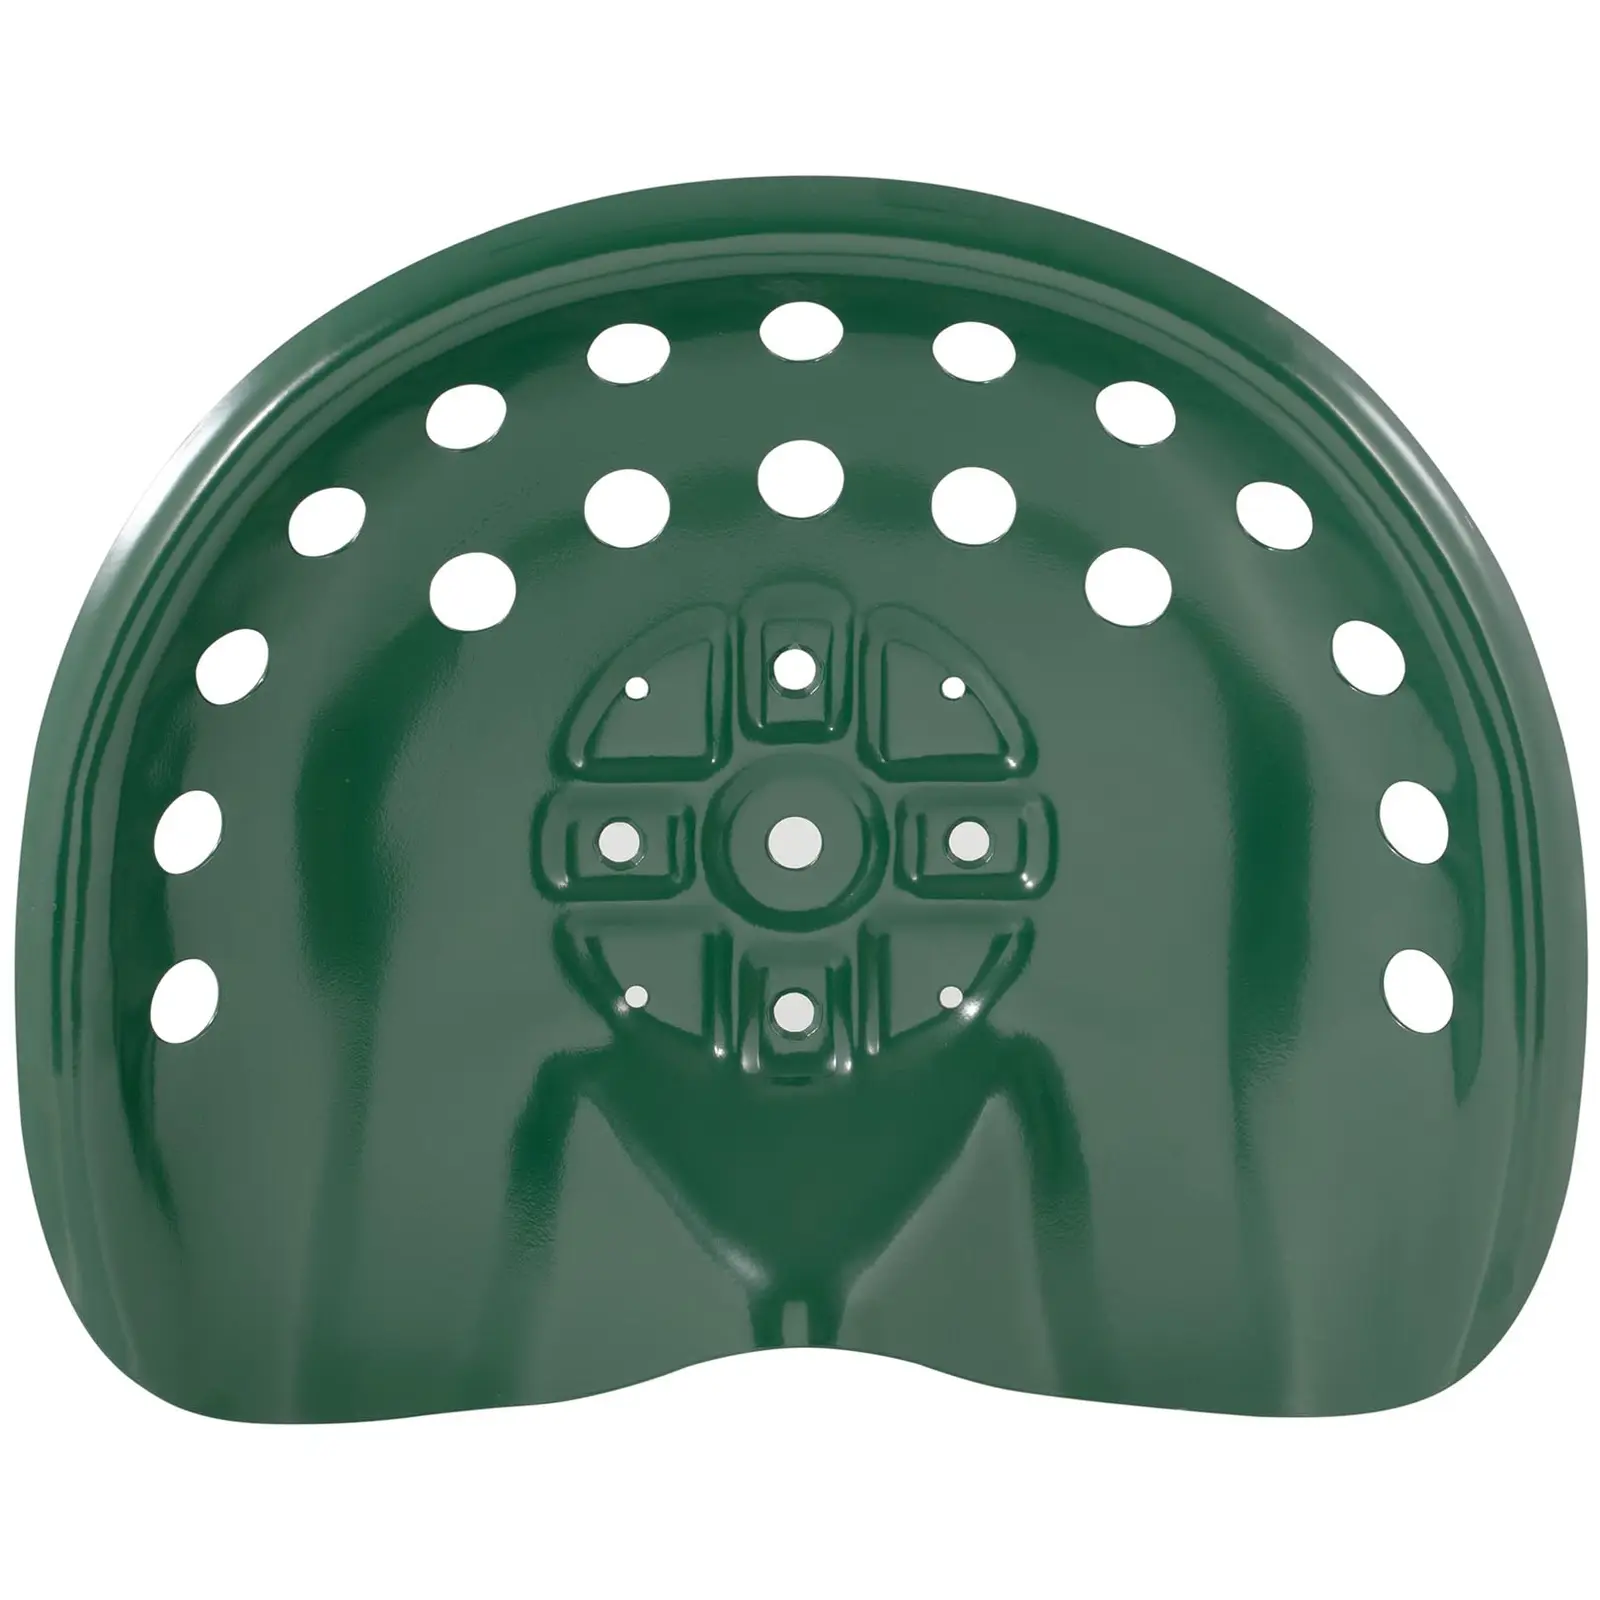 Tractor Seat Pan - 44x34 cm - backrest - green